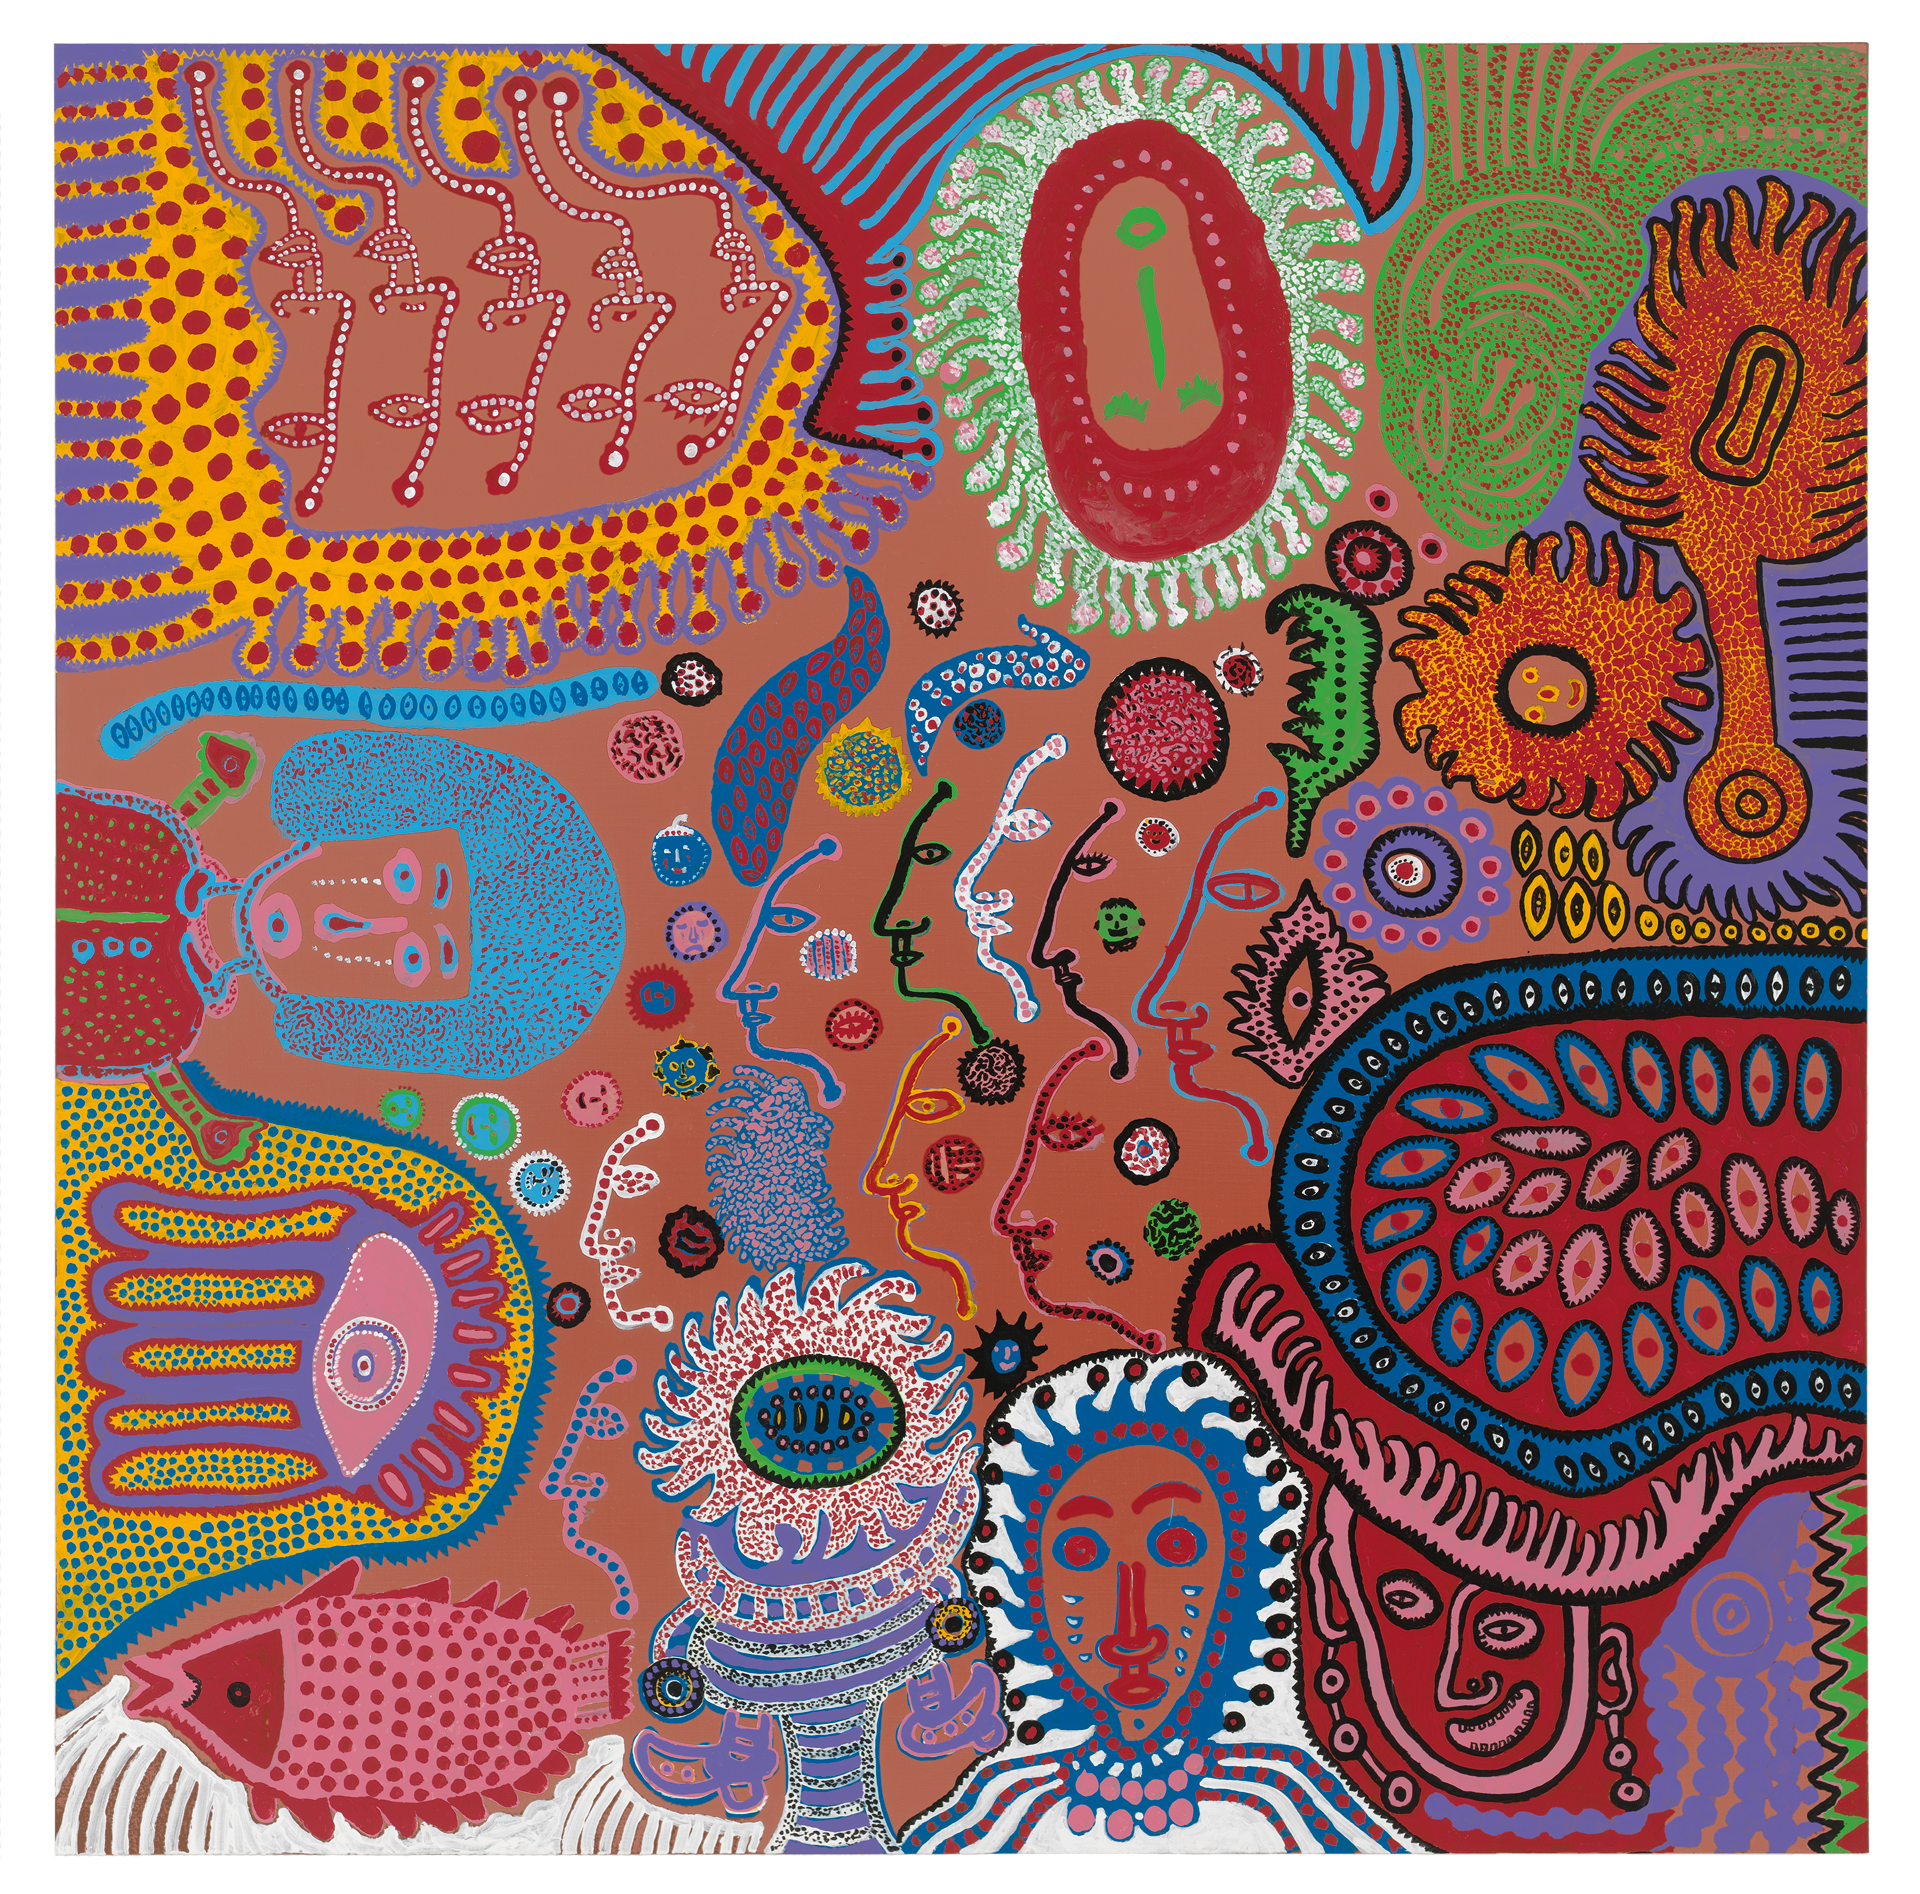 A painting by Yayoi Kusama, titled Give Me Love, dated 2015.